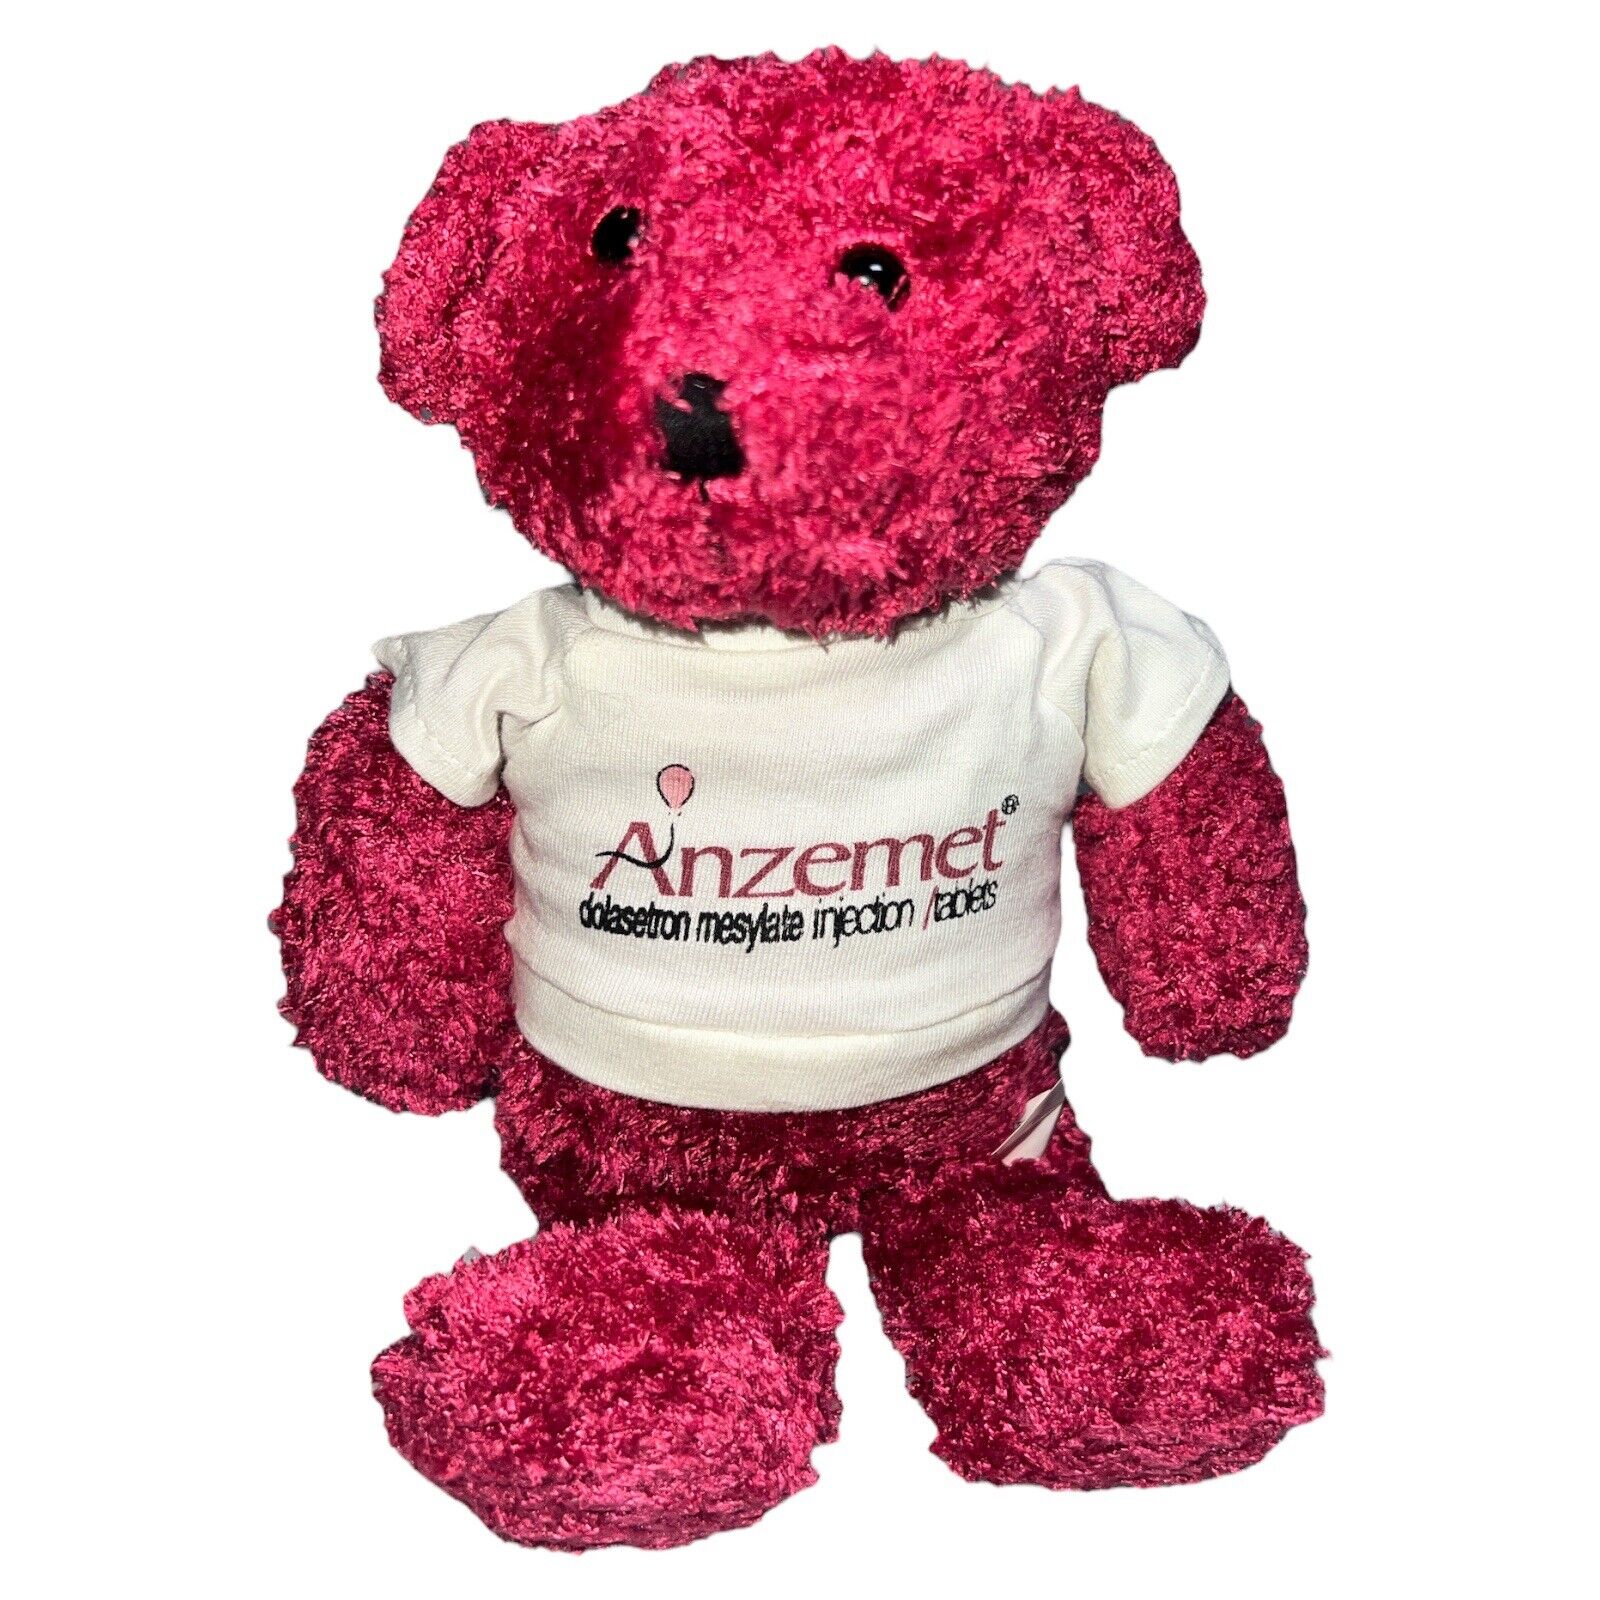 Anzemet Medical Medication Advertising Red Teddy Bear Plush 8” Inches 